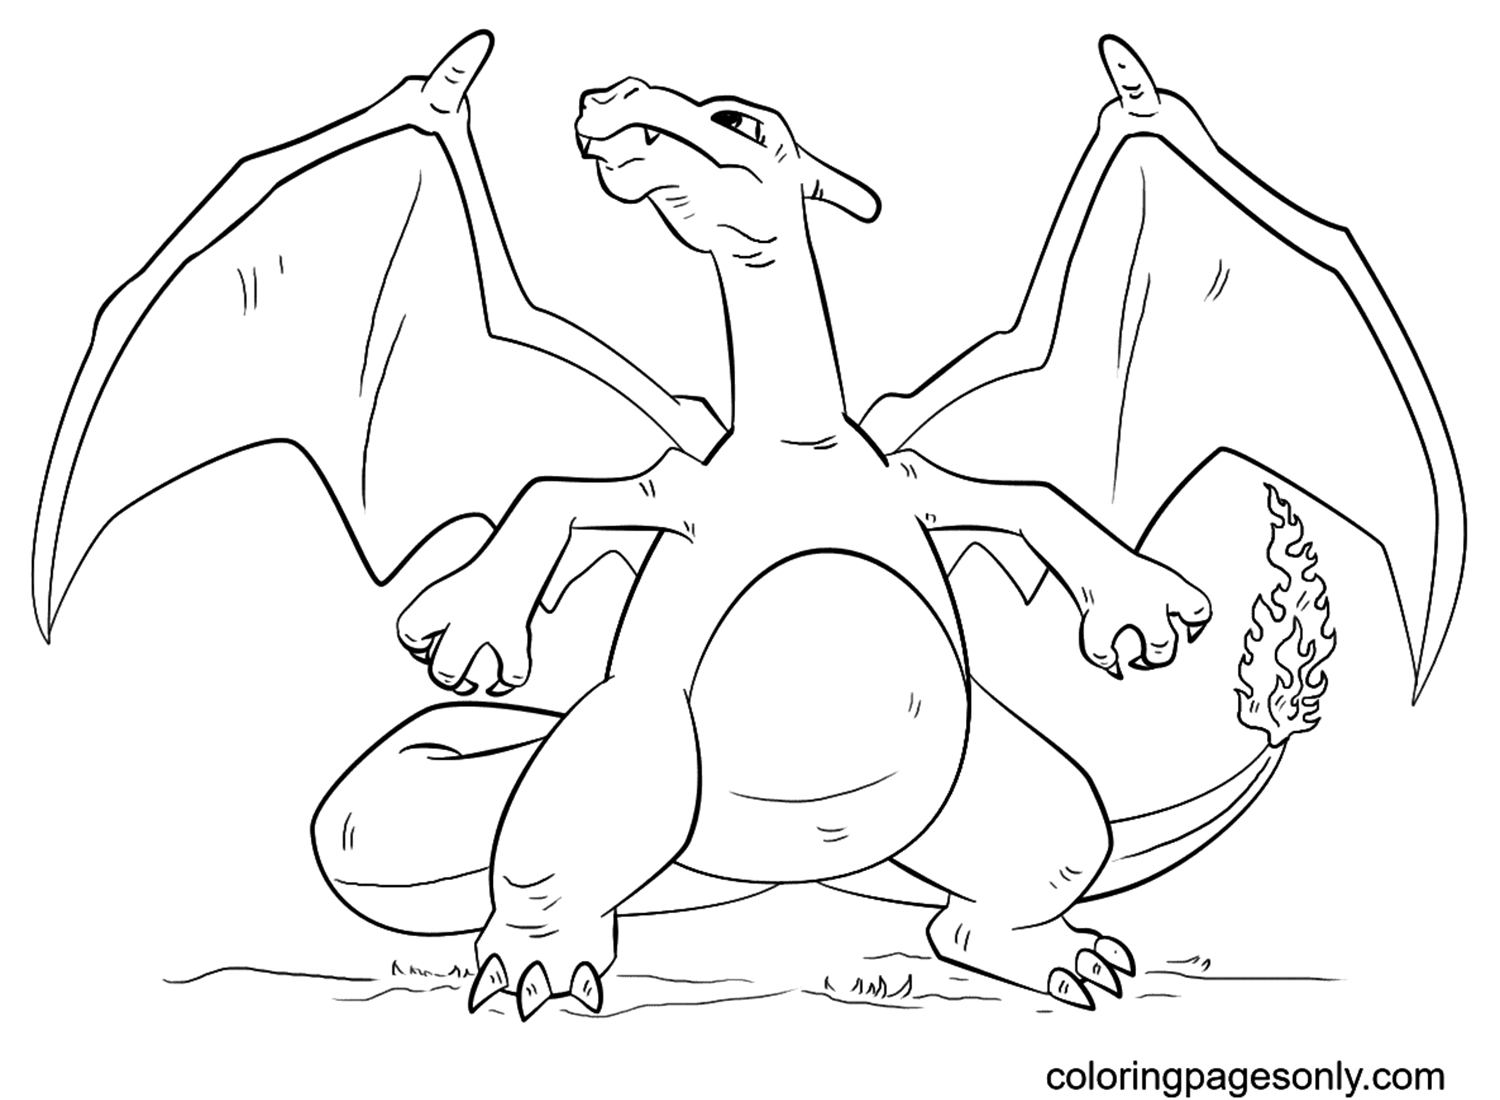 Charizard Pokemon Free Coloring Pages